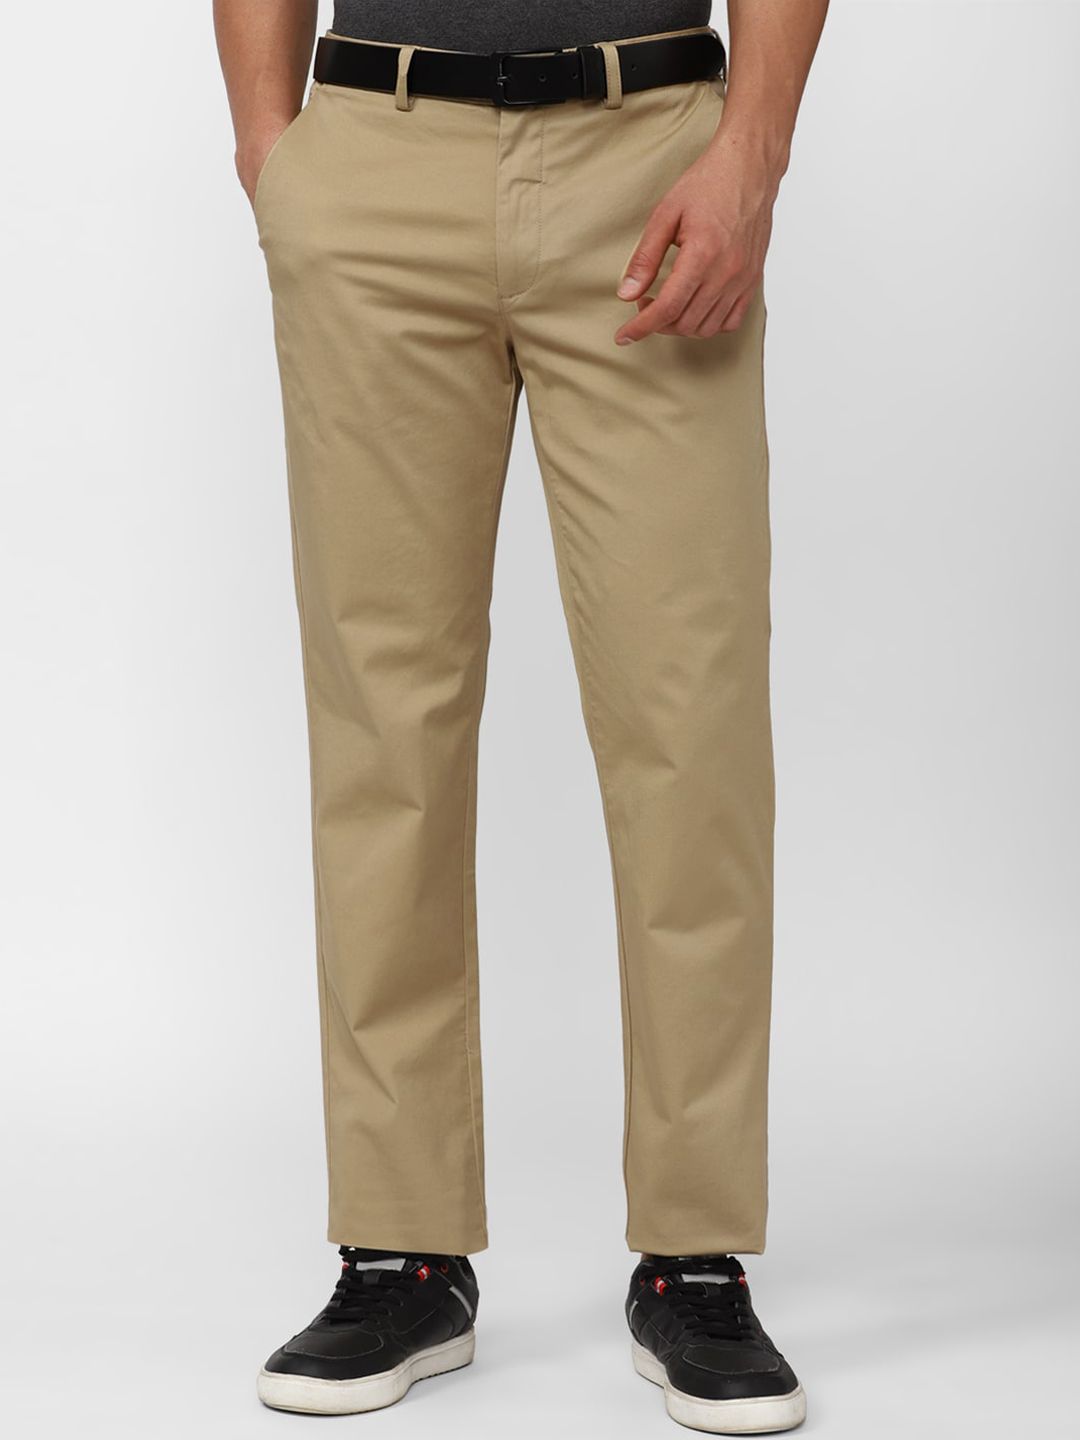 Peter England Chinos outlet - Men - 1800 products on sale | FASHIOLA.co.uk